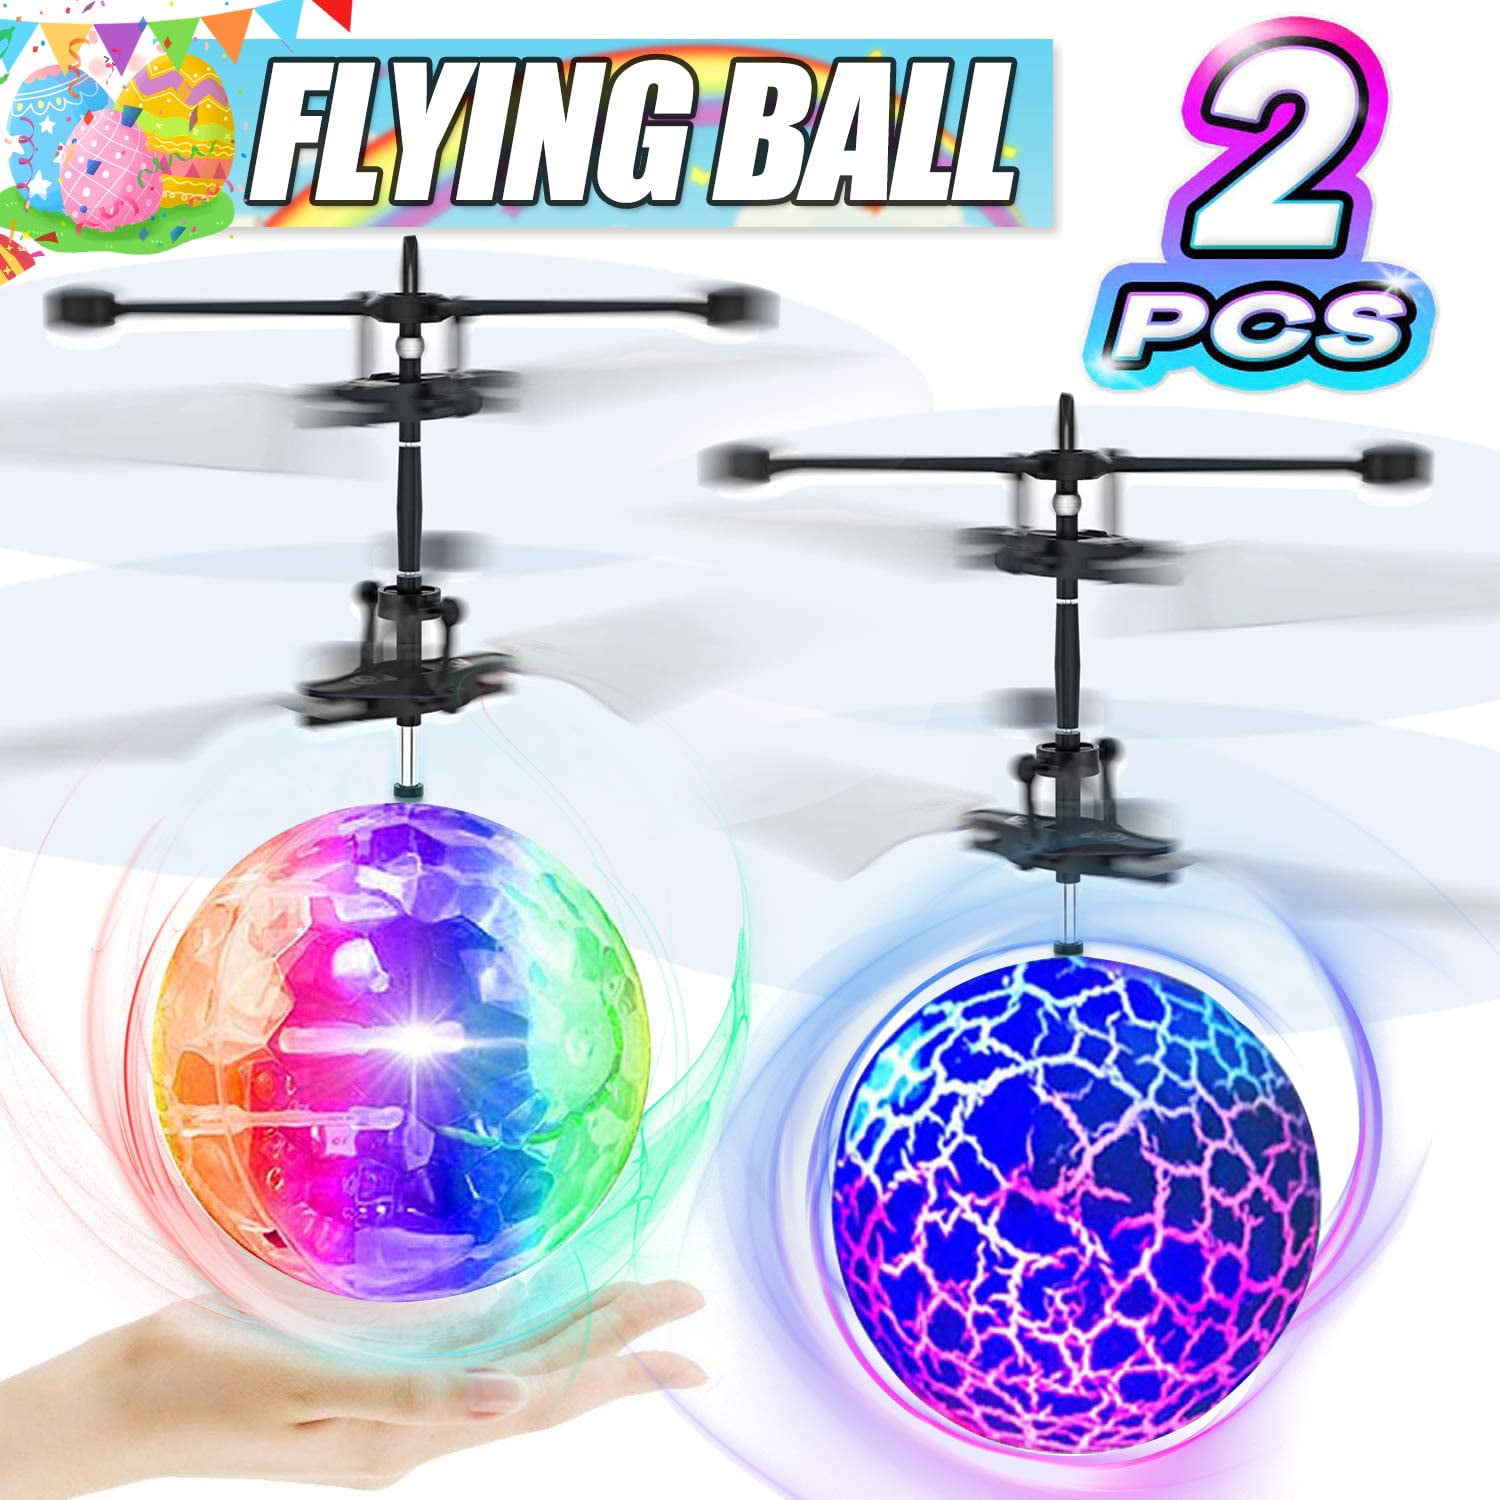 UFO Flying Ball Mini Drone Rc Toys Hand-Controlled Helicopter Kids Xmas Gifts US 